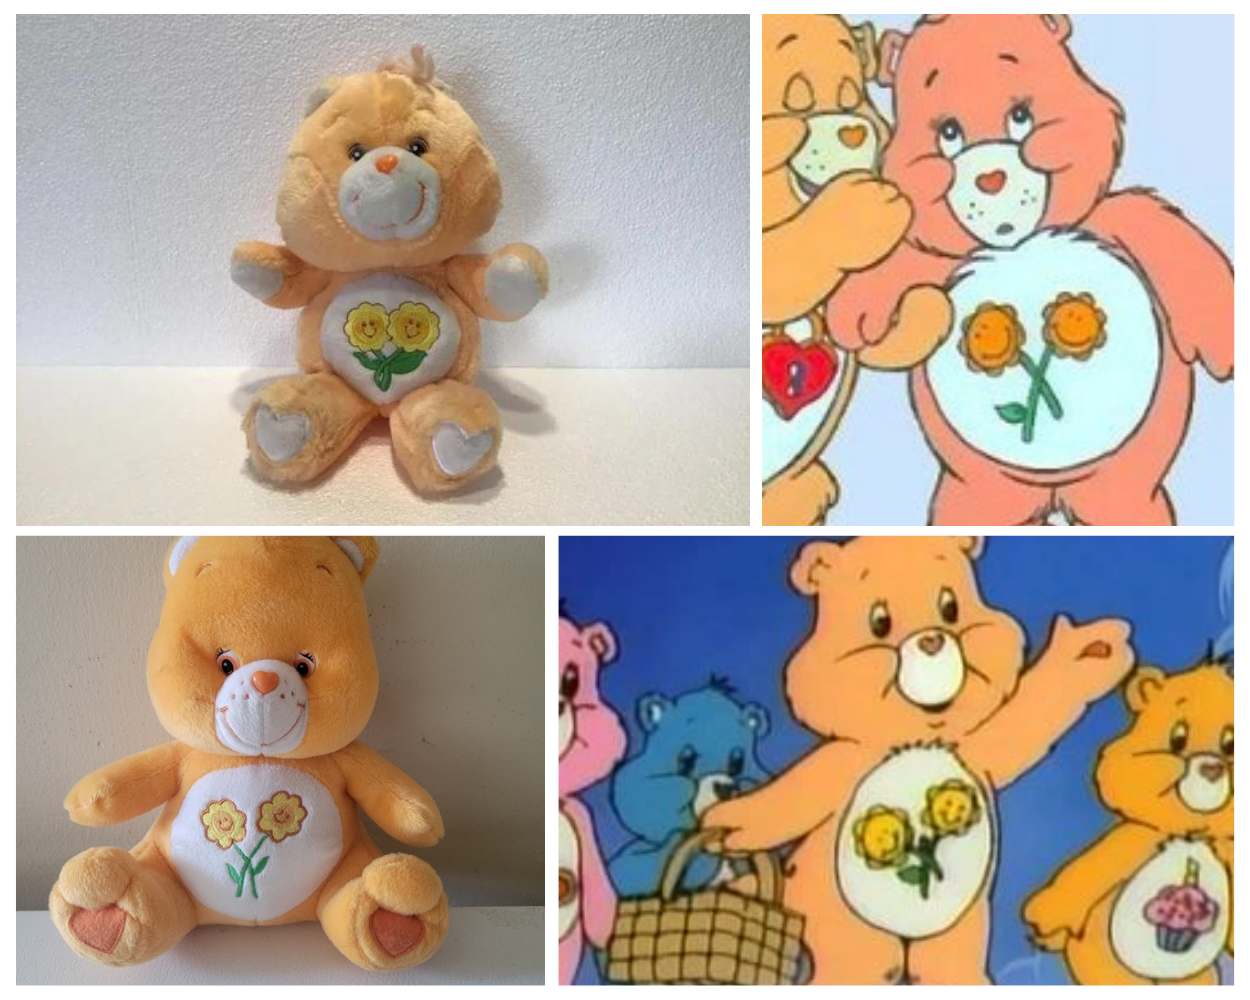 Friend Bear - care bear names and colors